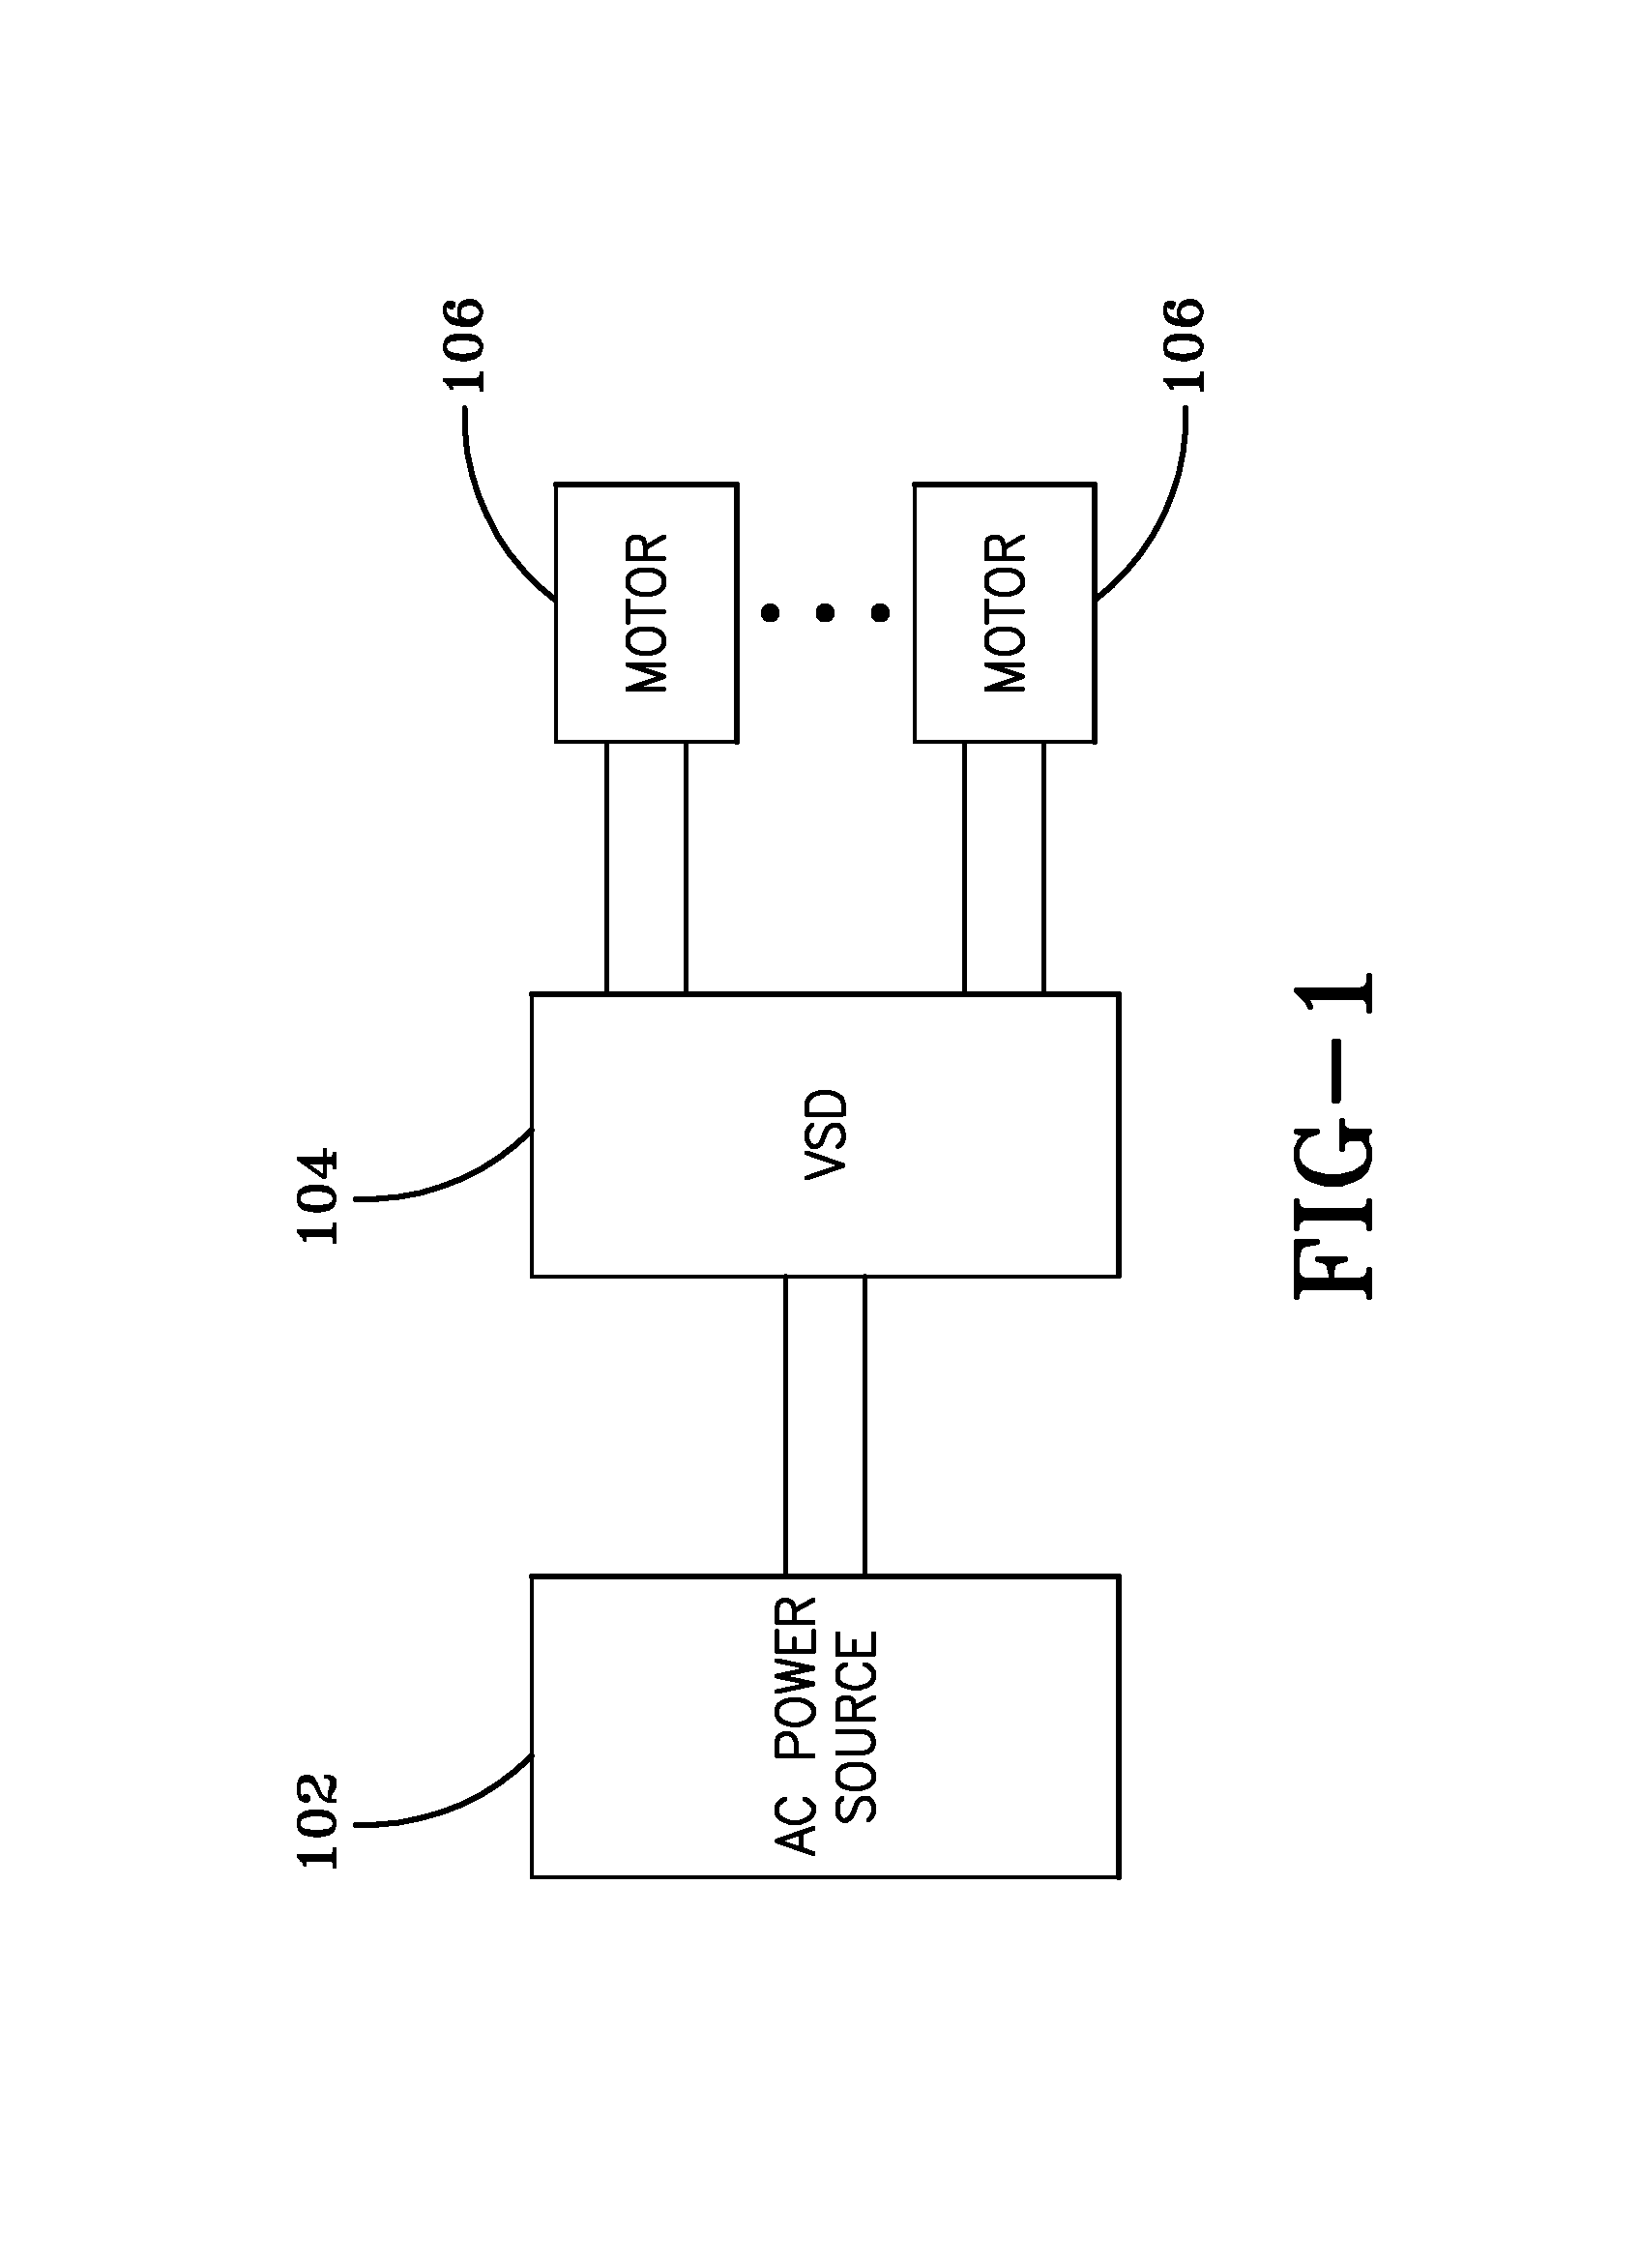 Variable speed drive for multiple loads